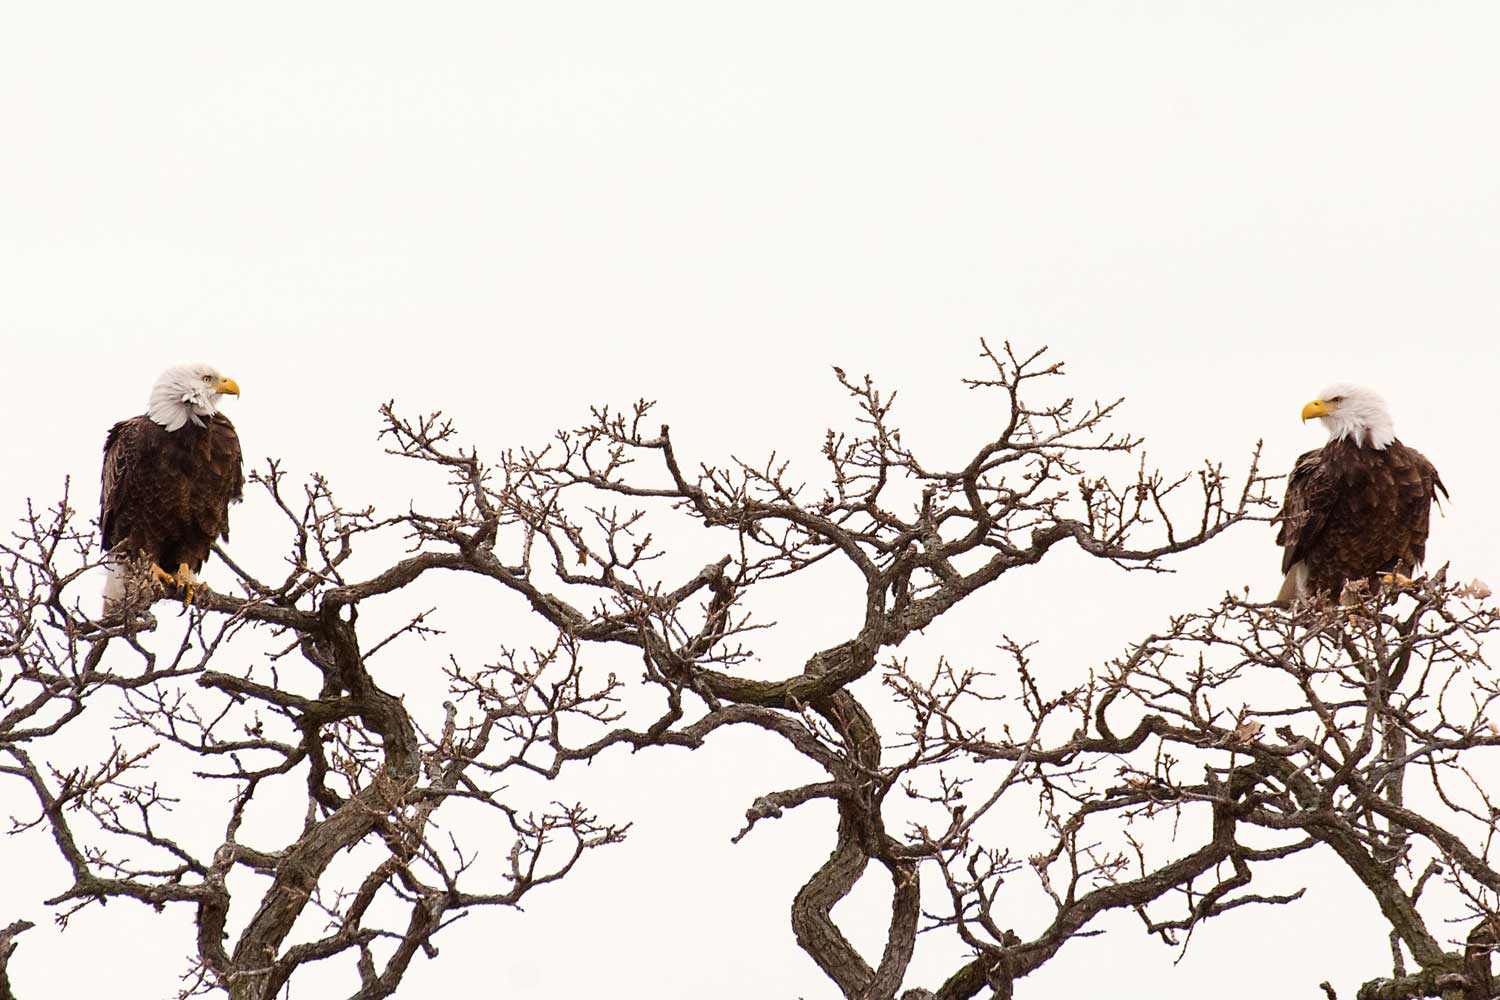 Two bald eagles in a tree.